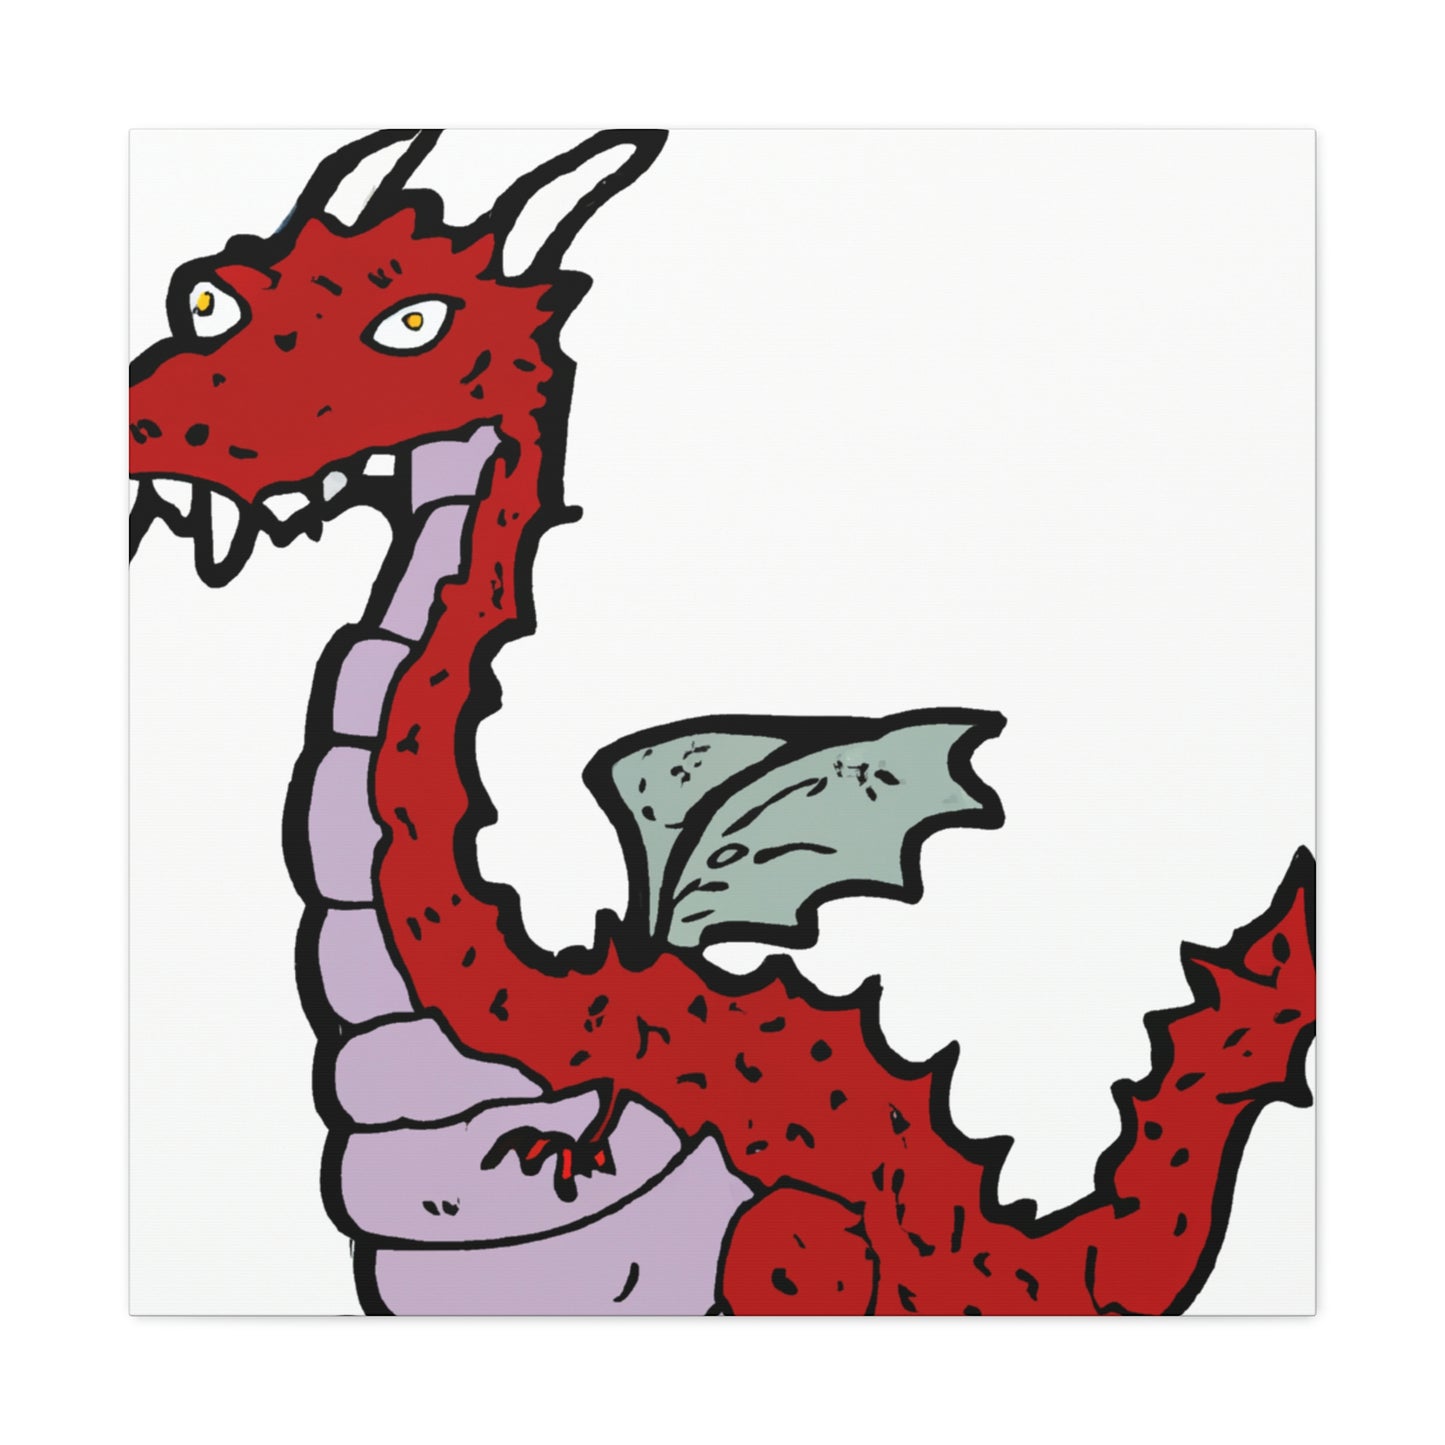 Hannella the Unstoppable. - Dragon Collector Canvas Wall Art